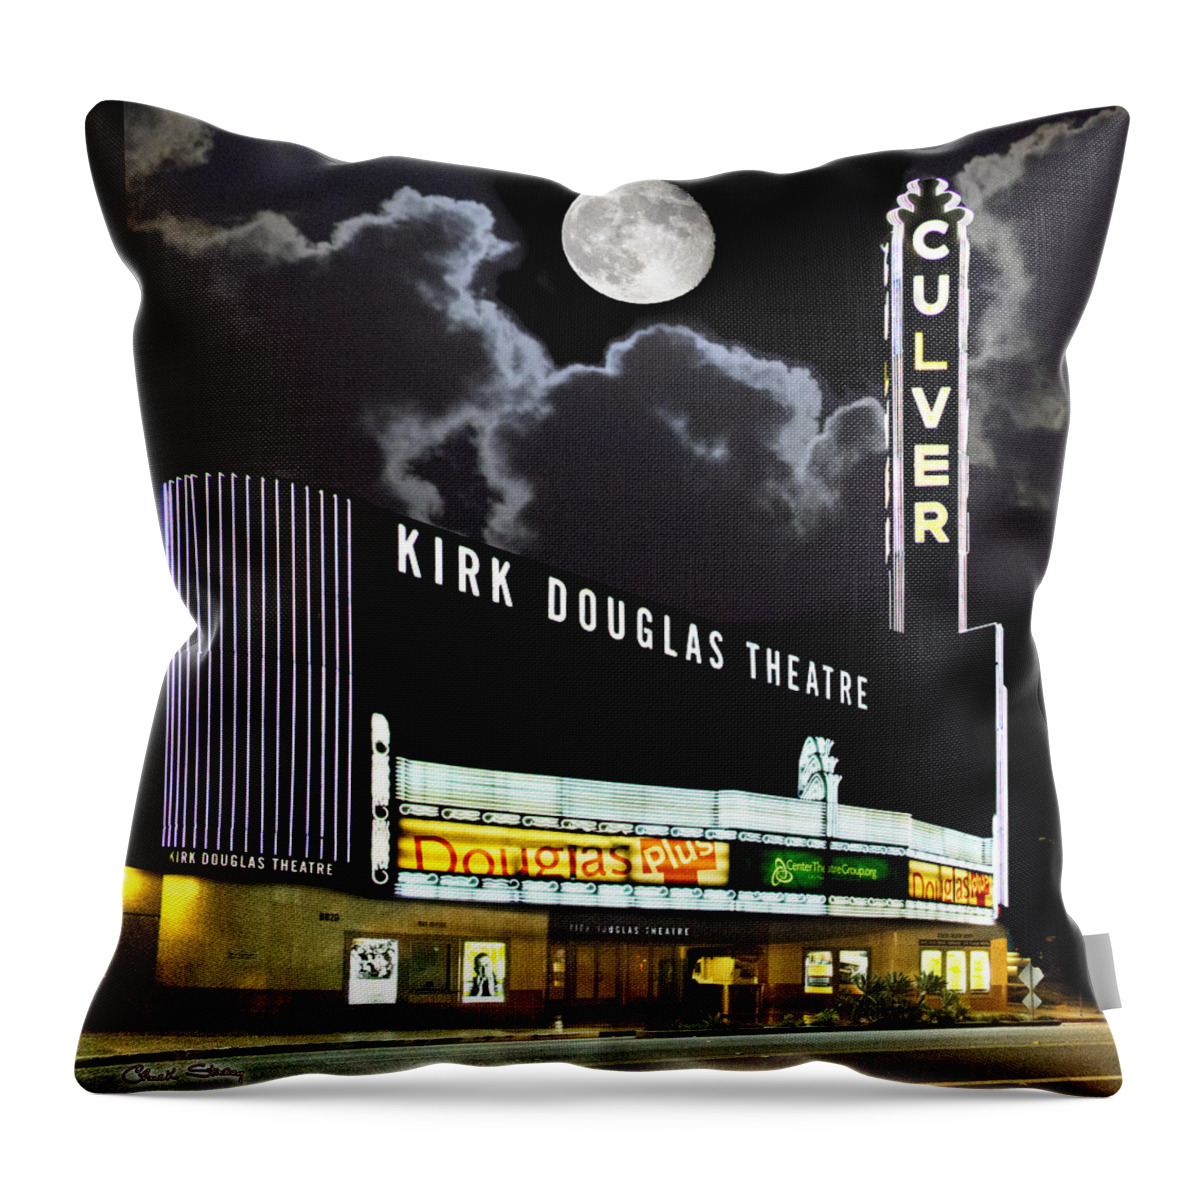 Kirk Douglas Theatre Throw Pillow featuring the photograph Kirk Douglas Theatre by Chuck Staley